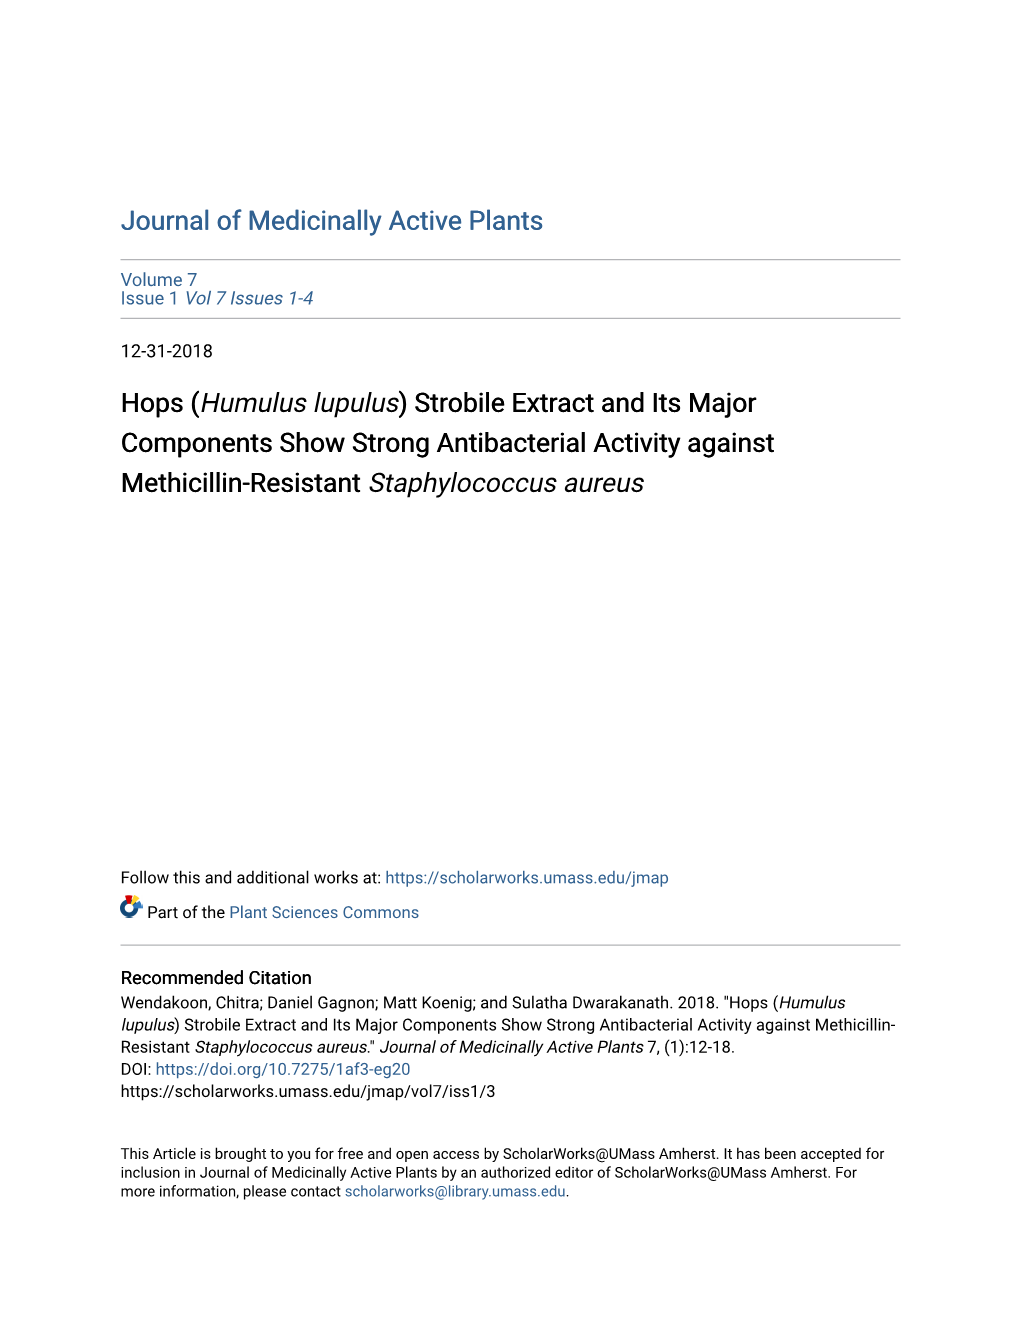 Humulus Lupulus) Strobile Extract and Its Major Components Show Strong Antibacterial Activity Against Methicillin-Resistant Staphylococcus Aureus